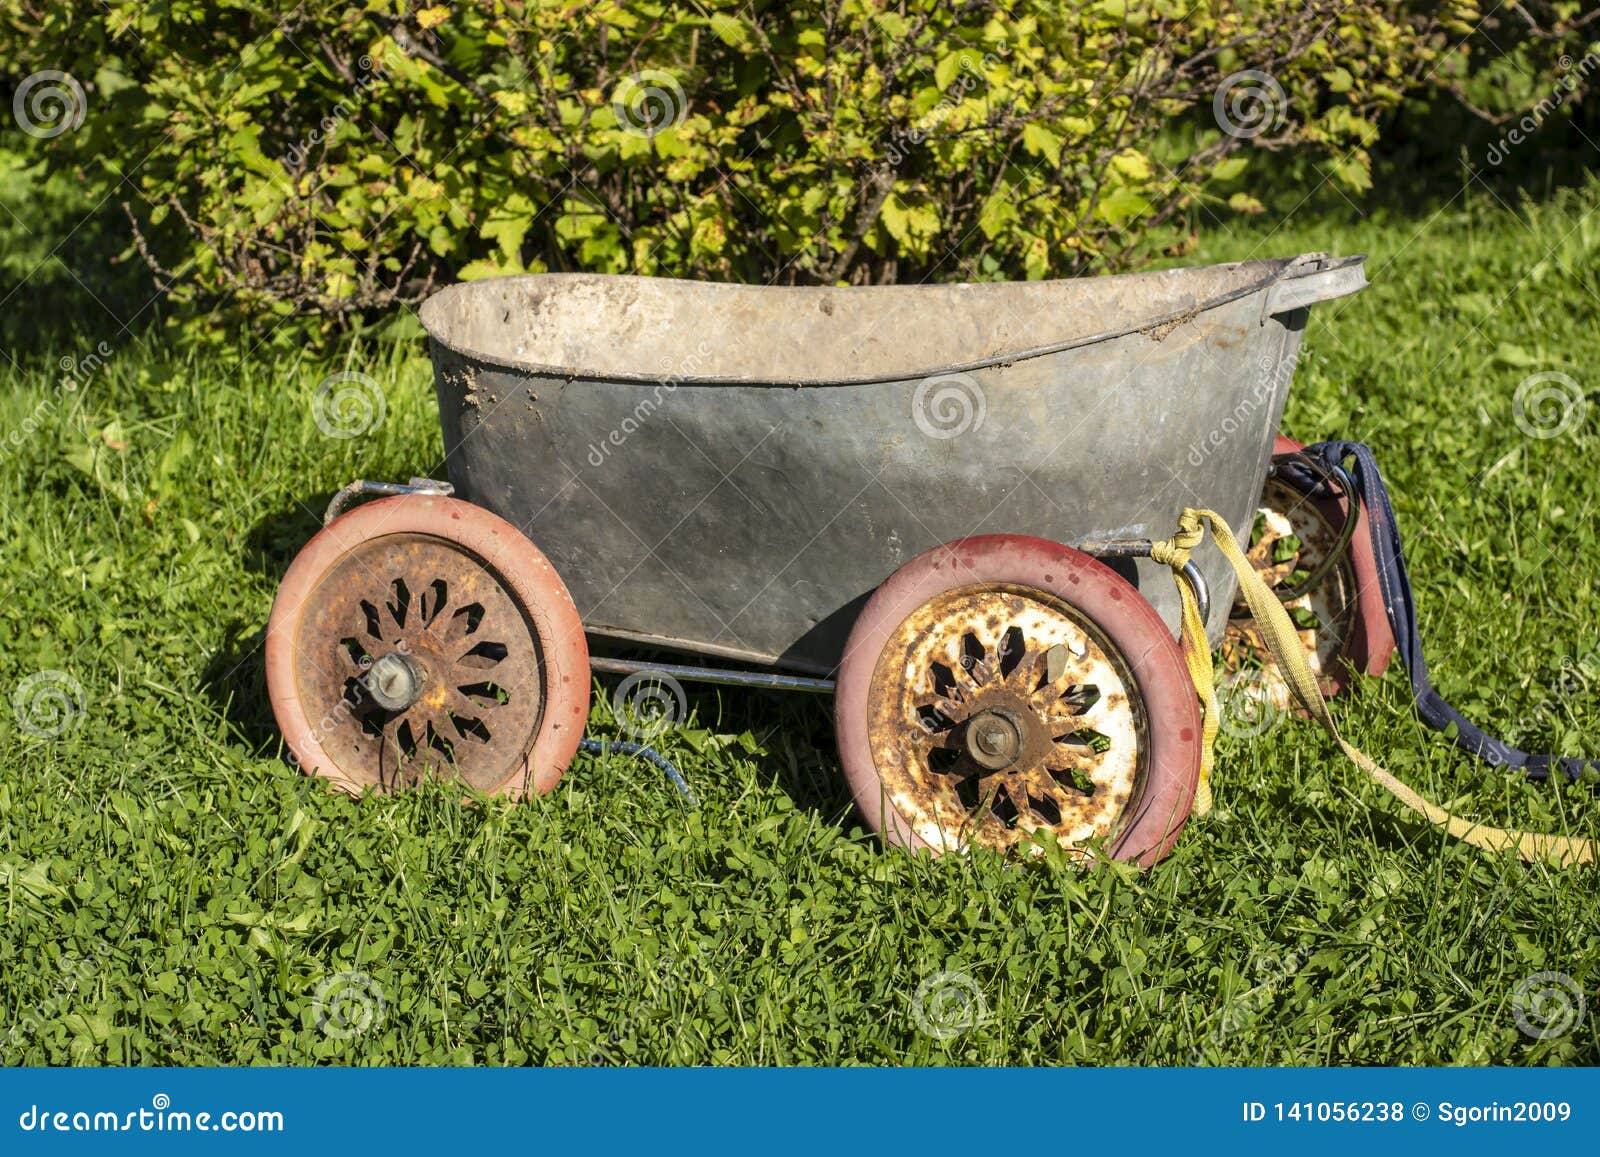 antique baby carriage wheels